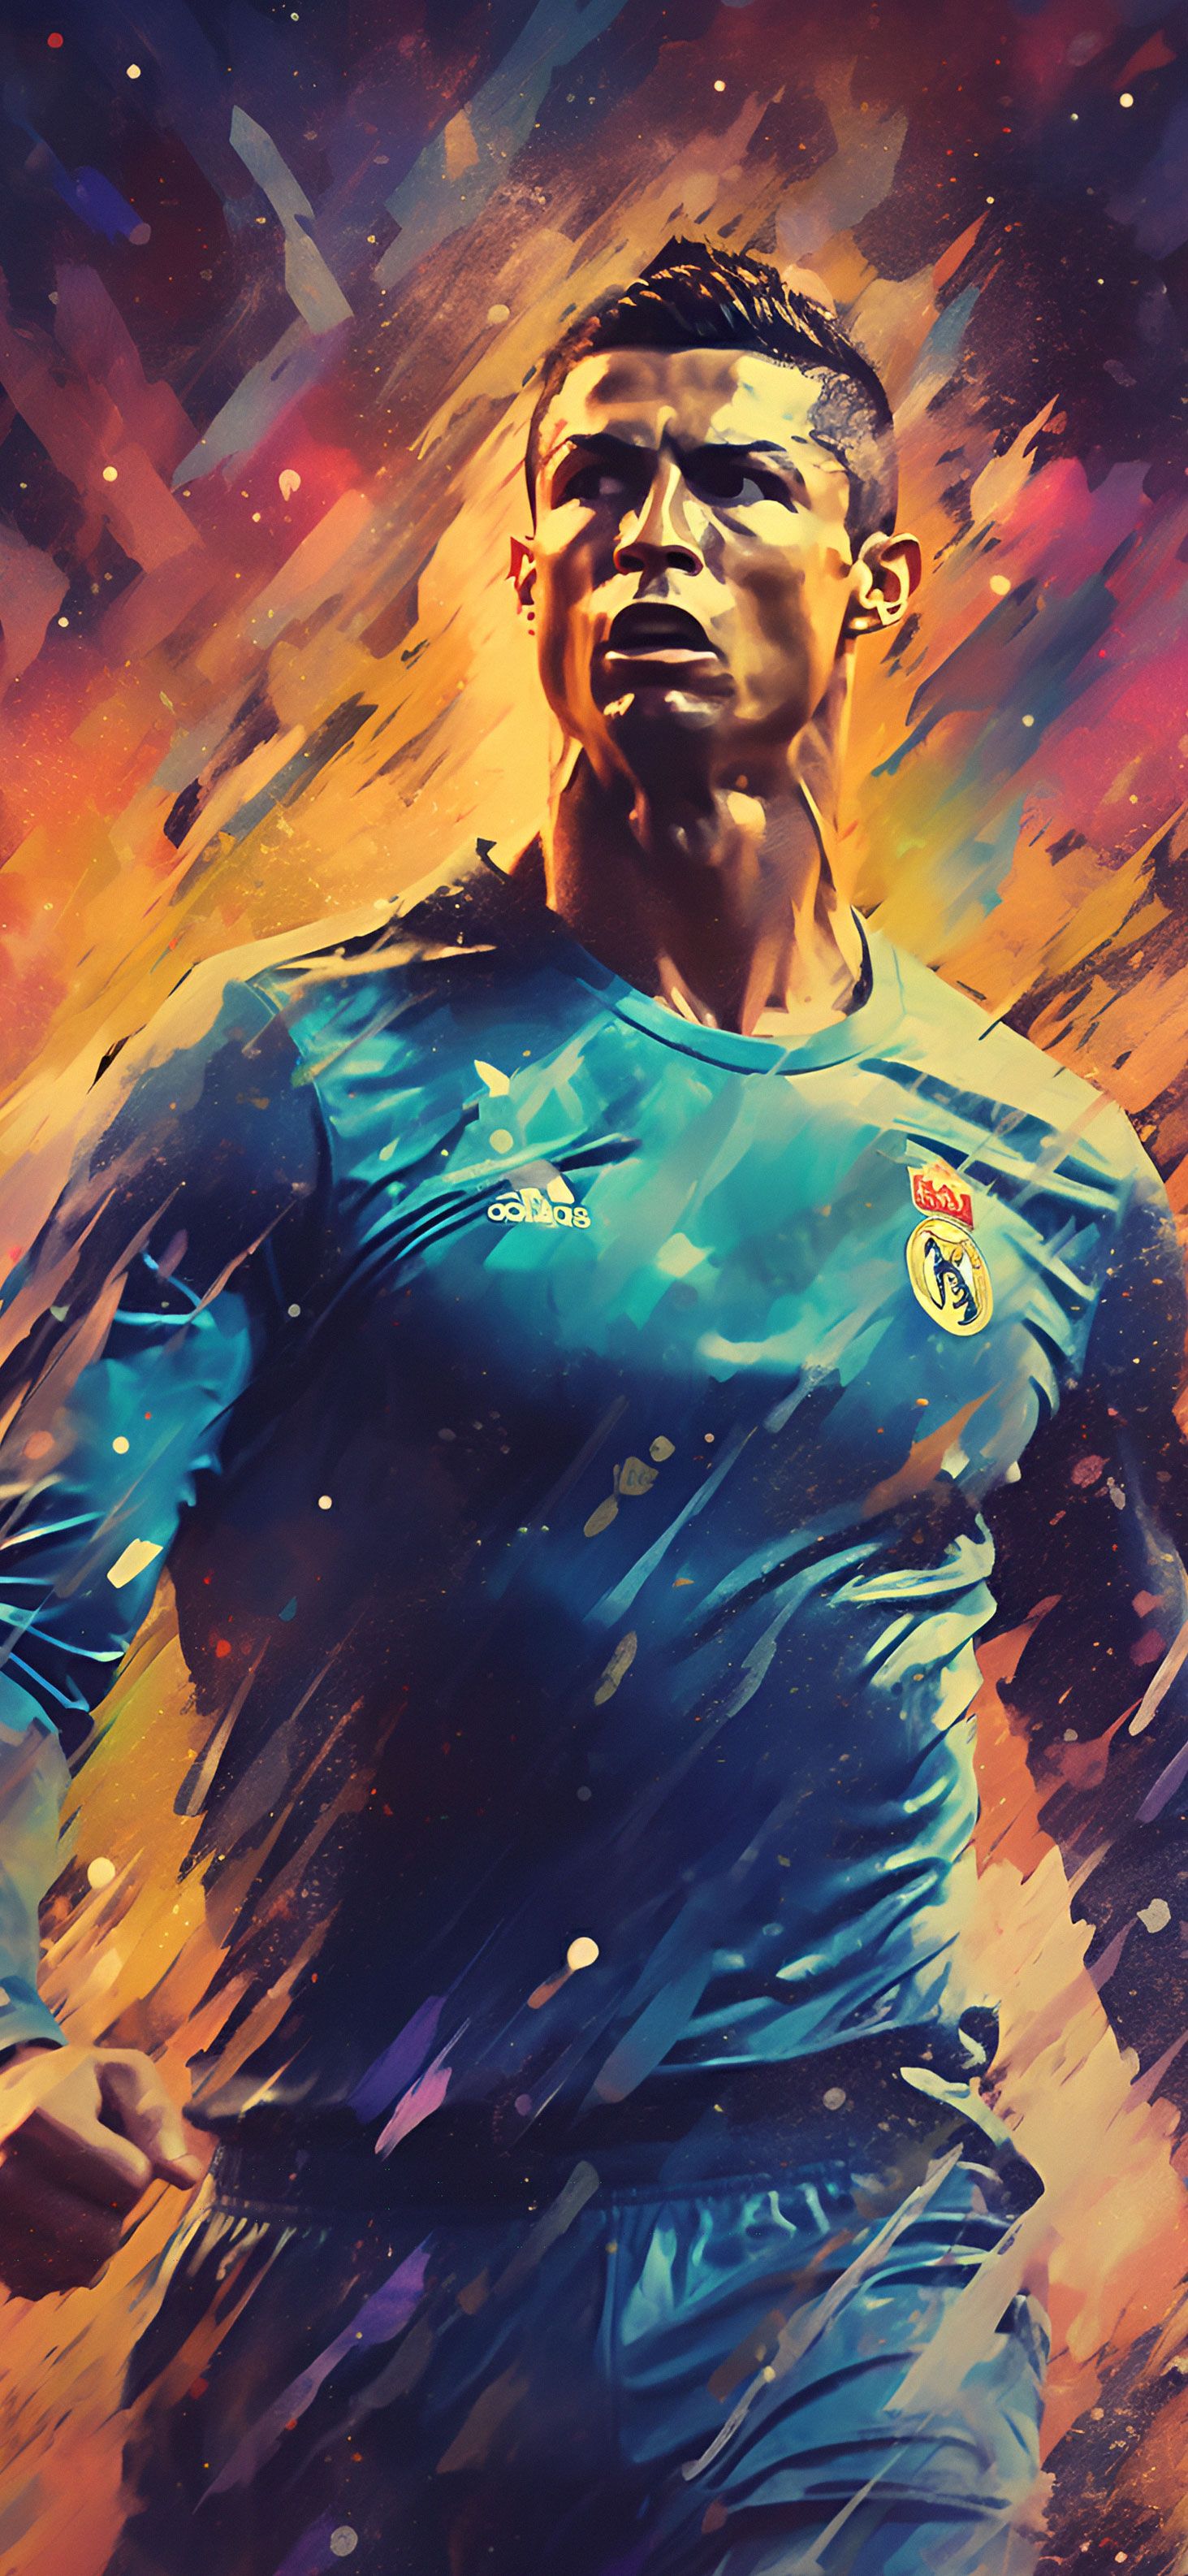 Cristiano Ronaldo Iphone Wallpaper with high-resolution 1242x2208 pixel. You can use this wallpaper for your iPhone 5, 6, 7, 8, X, XS, XR backgrounds, Mobile Screensaver, or iPad Lock Screen - Cristiano Ronaldo